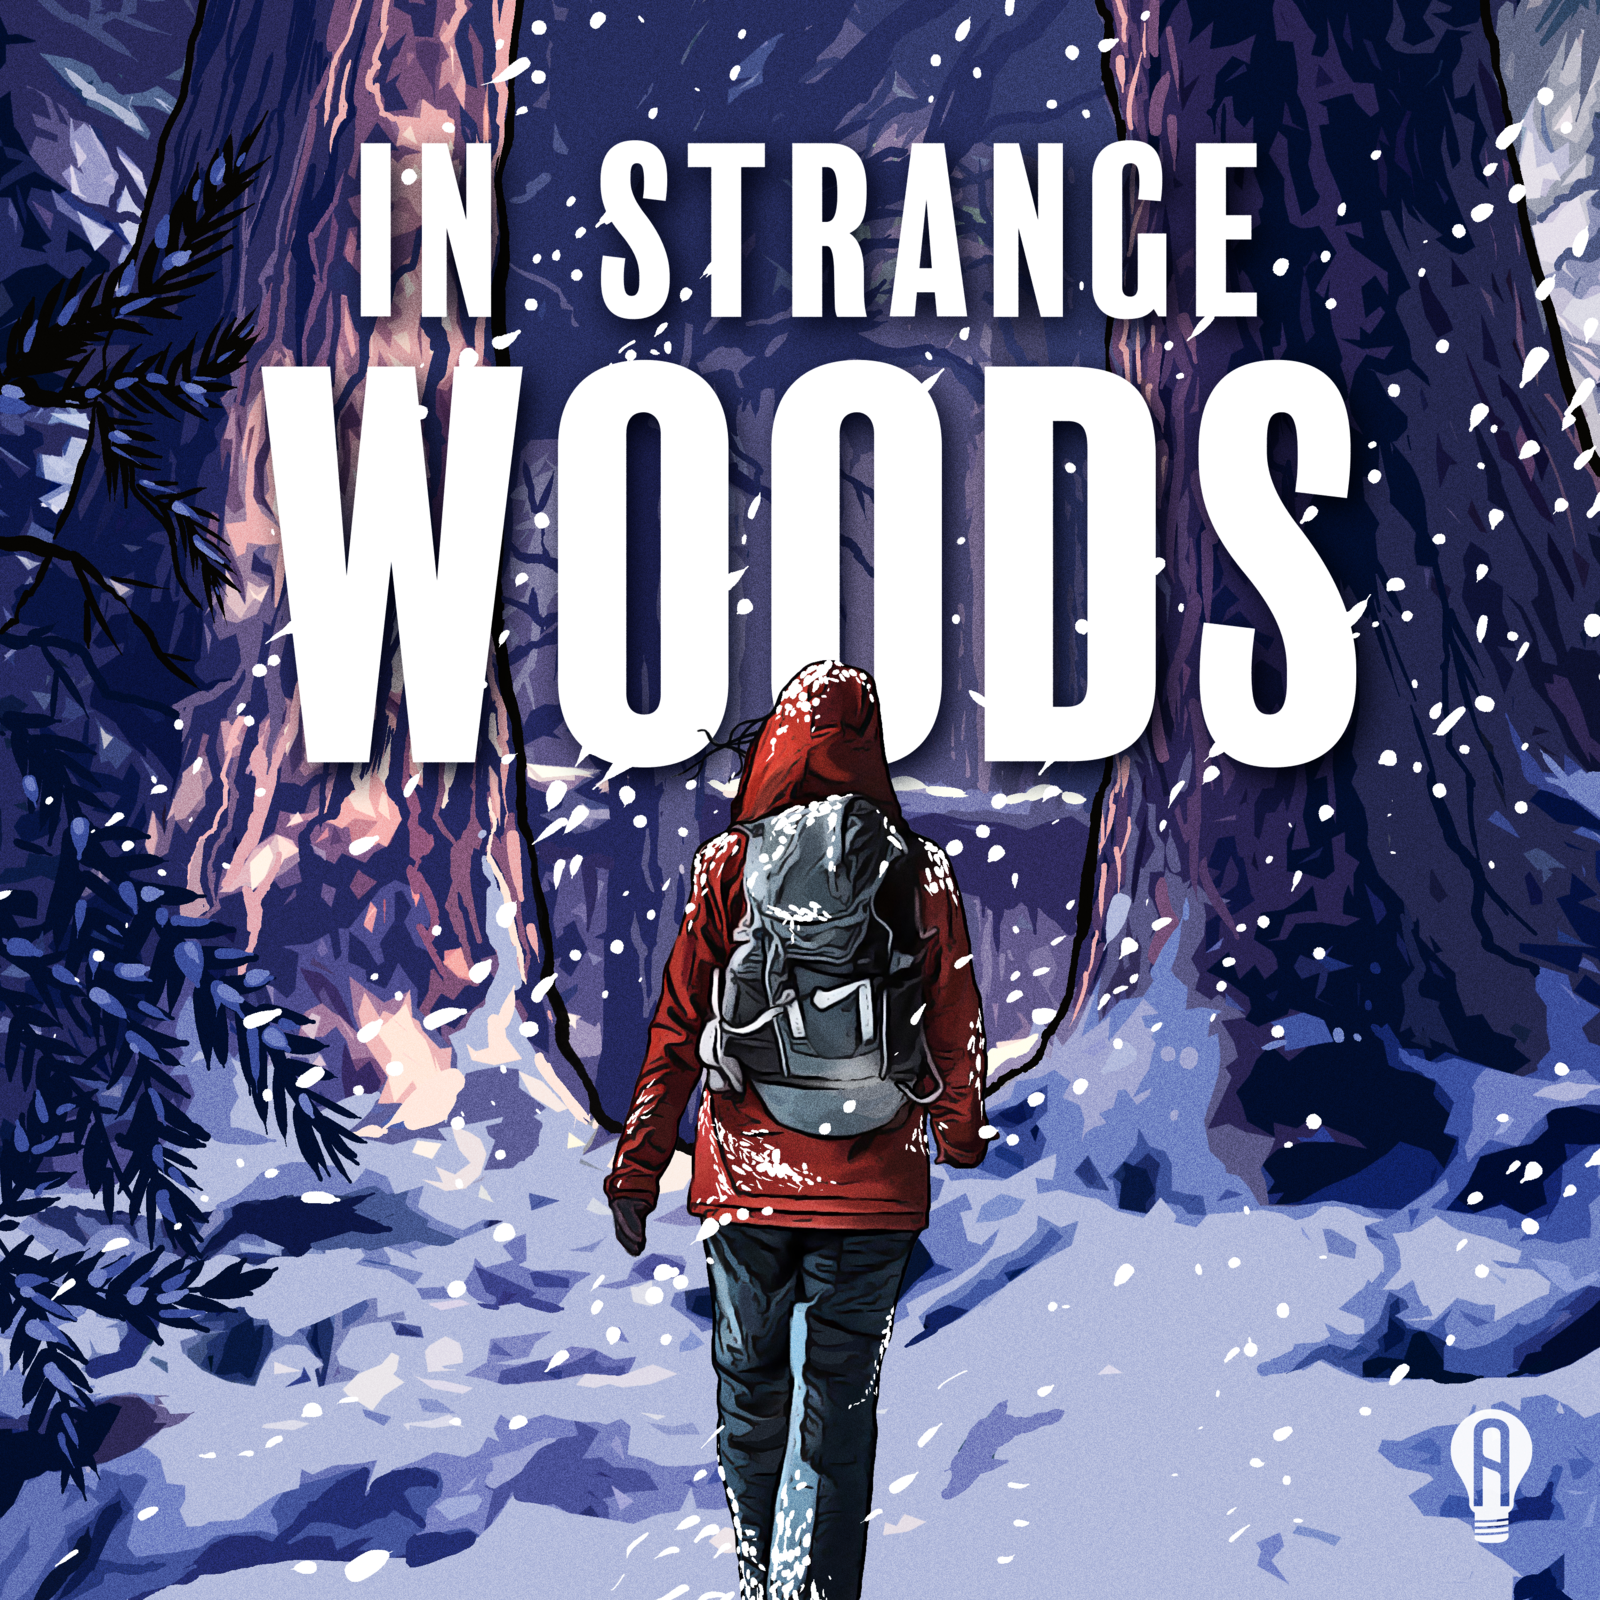 In Strange Woods: A Musical Podcast podcast